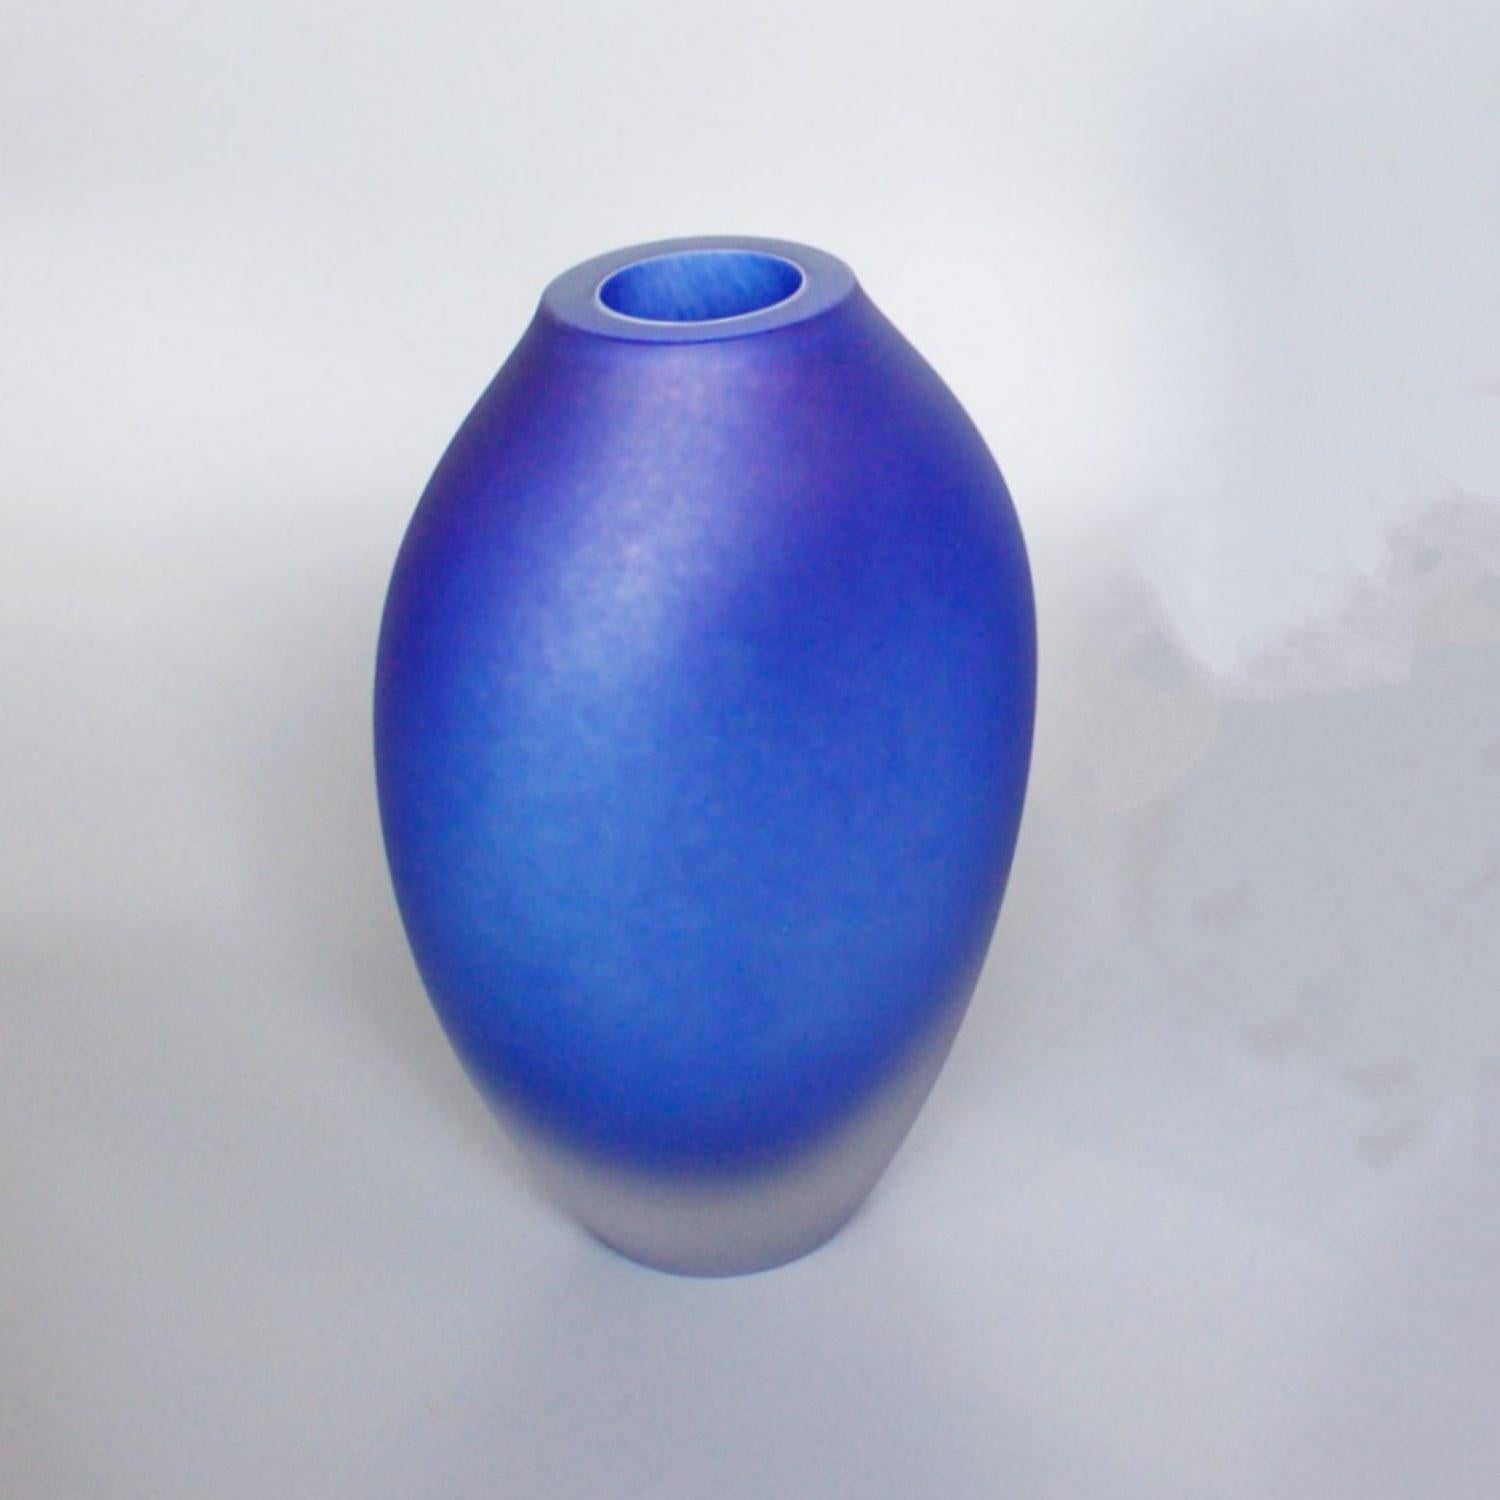 A frosted blue glass Murano vase by Ercole for Barovier & Toso in Murano Italy. Signed to underneath. 

Dimensions: H 24.5cm, W 15cm, D 7cm

Origin: Italy

Date: circa 1970s

Barovier & Toso is the oldest glass company in Italy, dating back